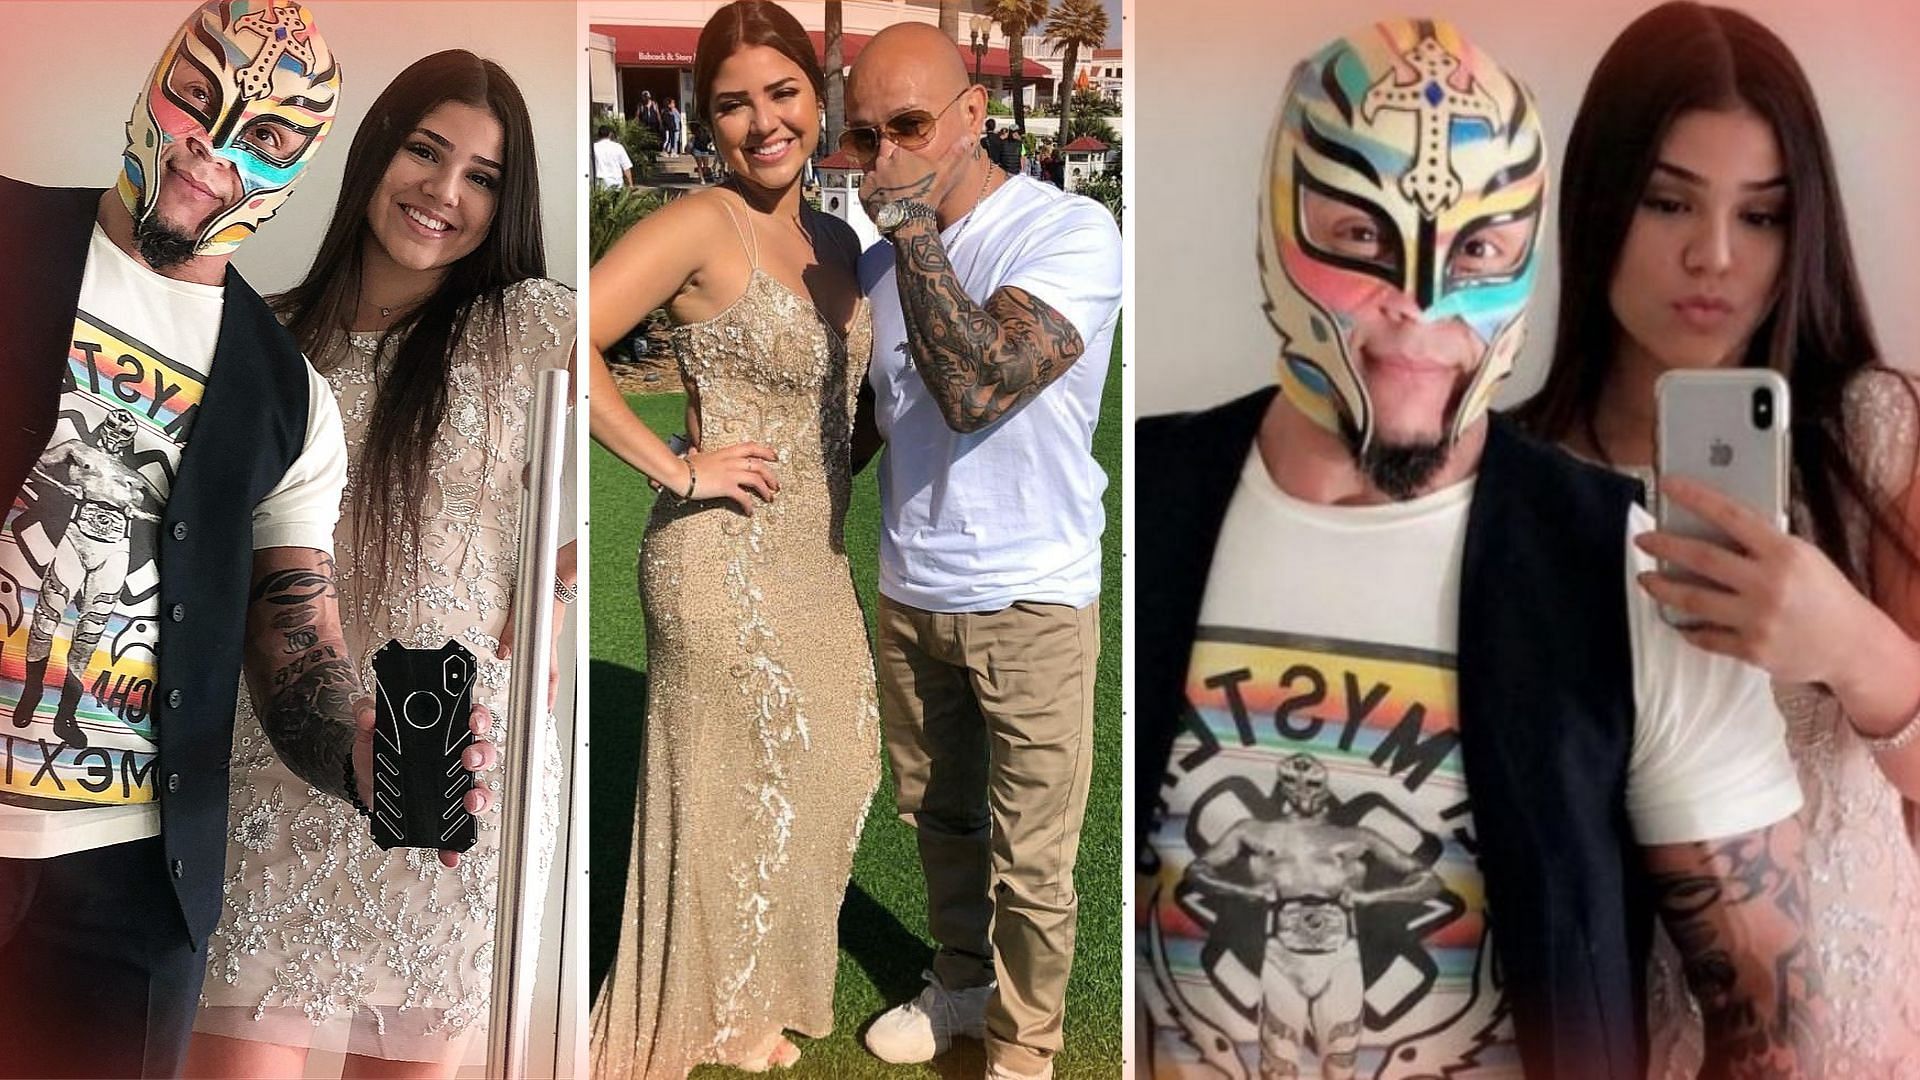 Rey Mysterio&#039;s daughter, Aalyah has expressed an interest in competing in the ring